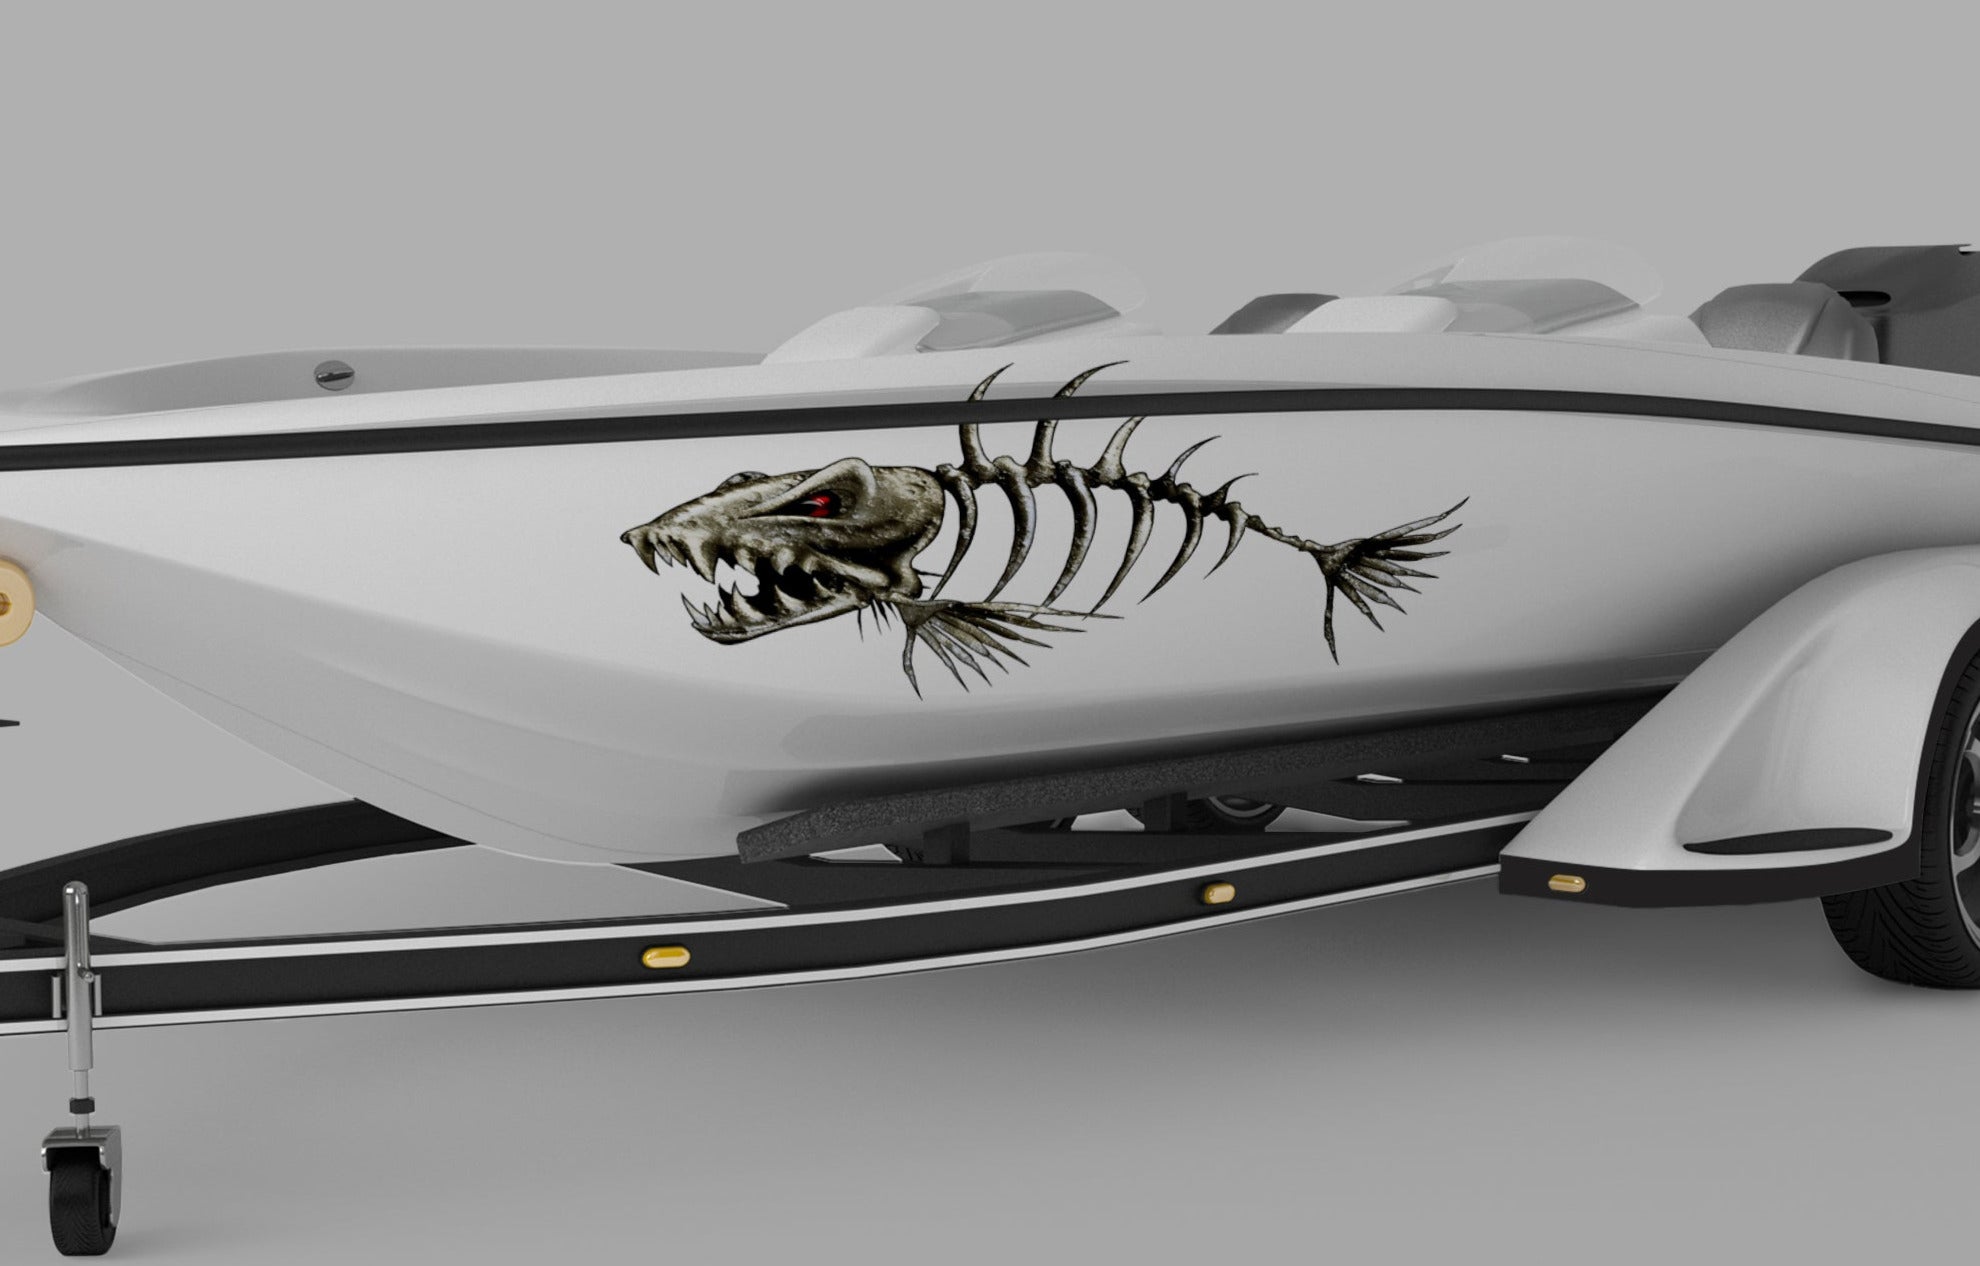 Monster fish vinyl decals on the side off white boat